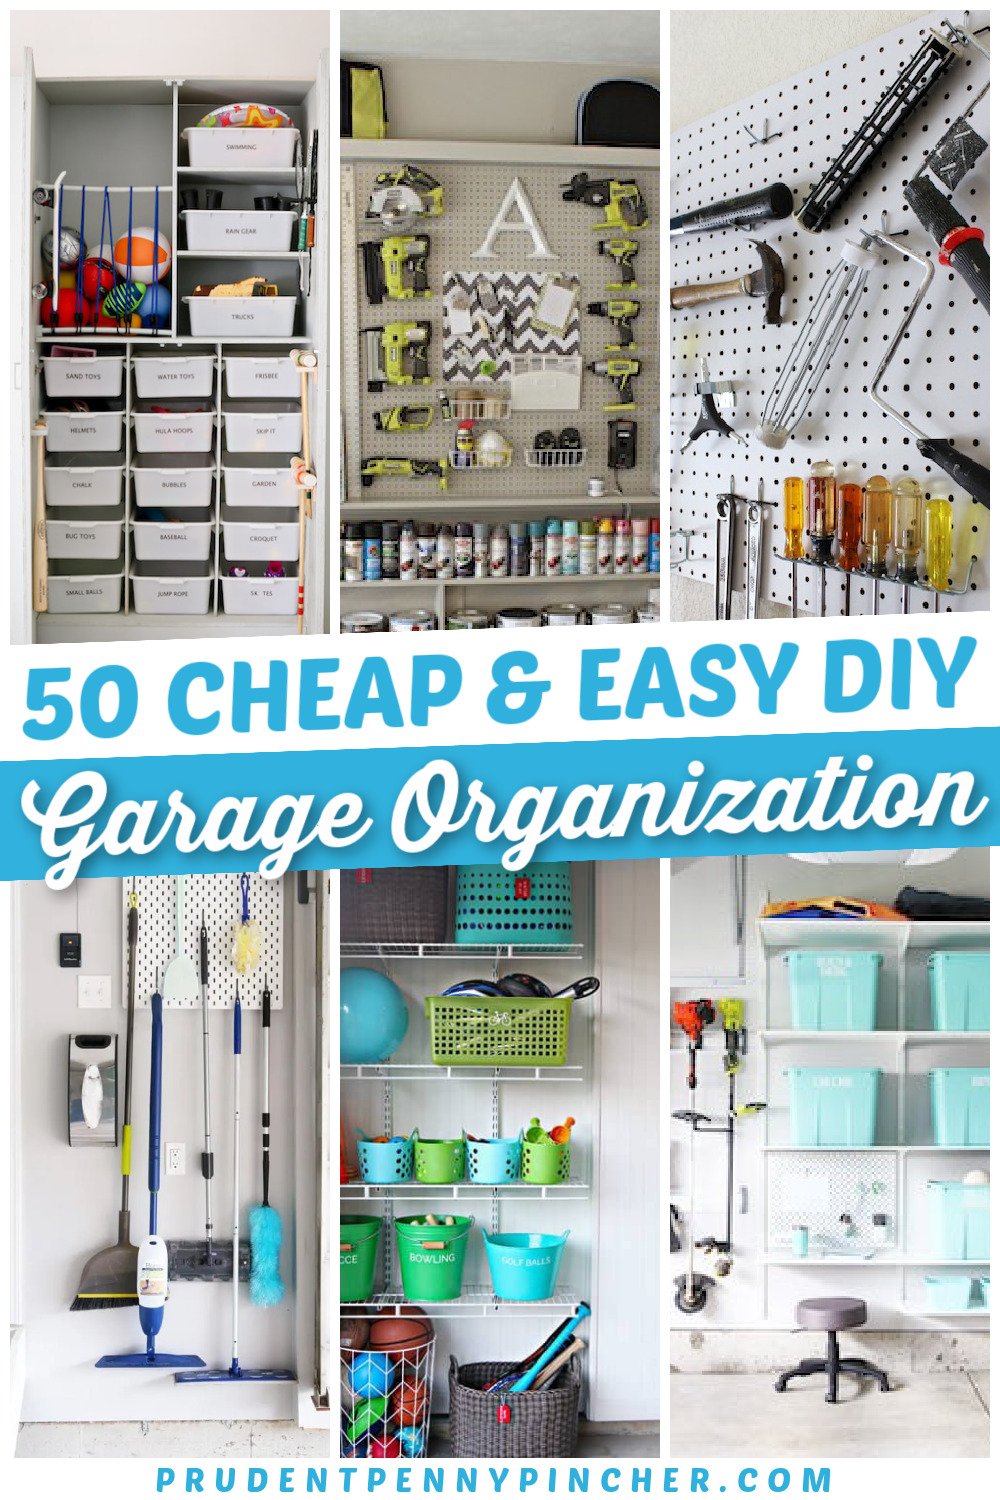 What Can You Do About Garage Organization Right Now